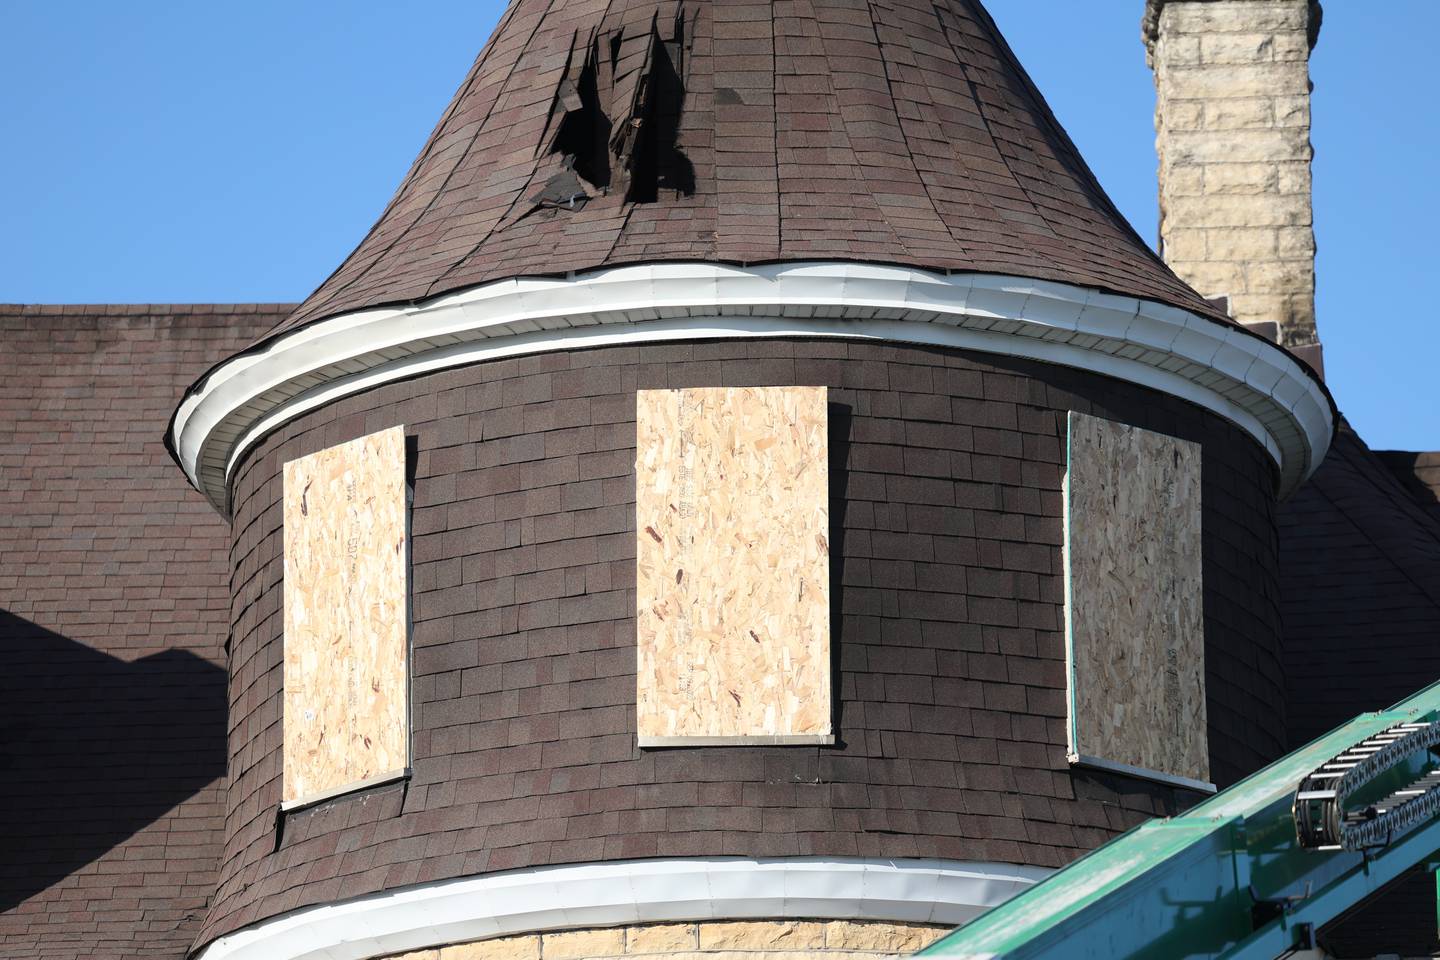 Windows are boarded up that was damaged by a fire at the Haley Mansion on Wednesday evening.